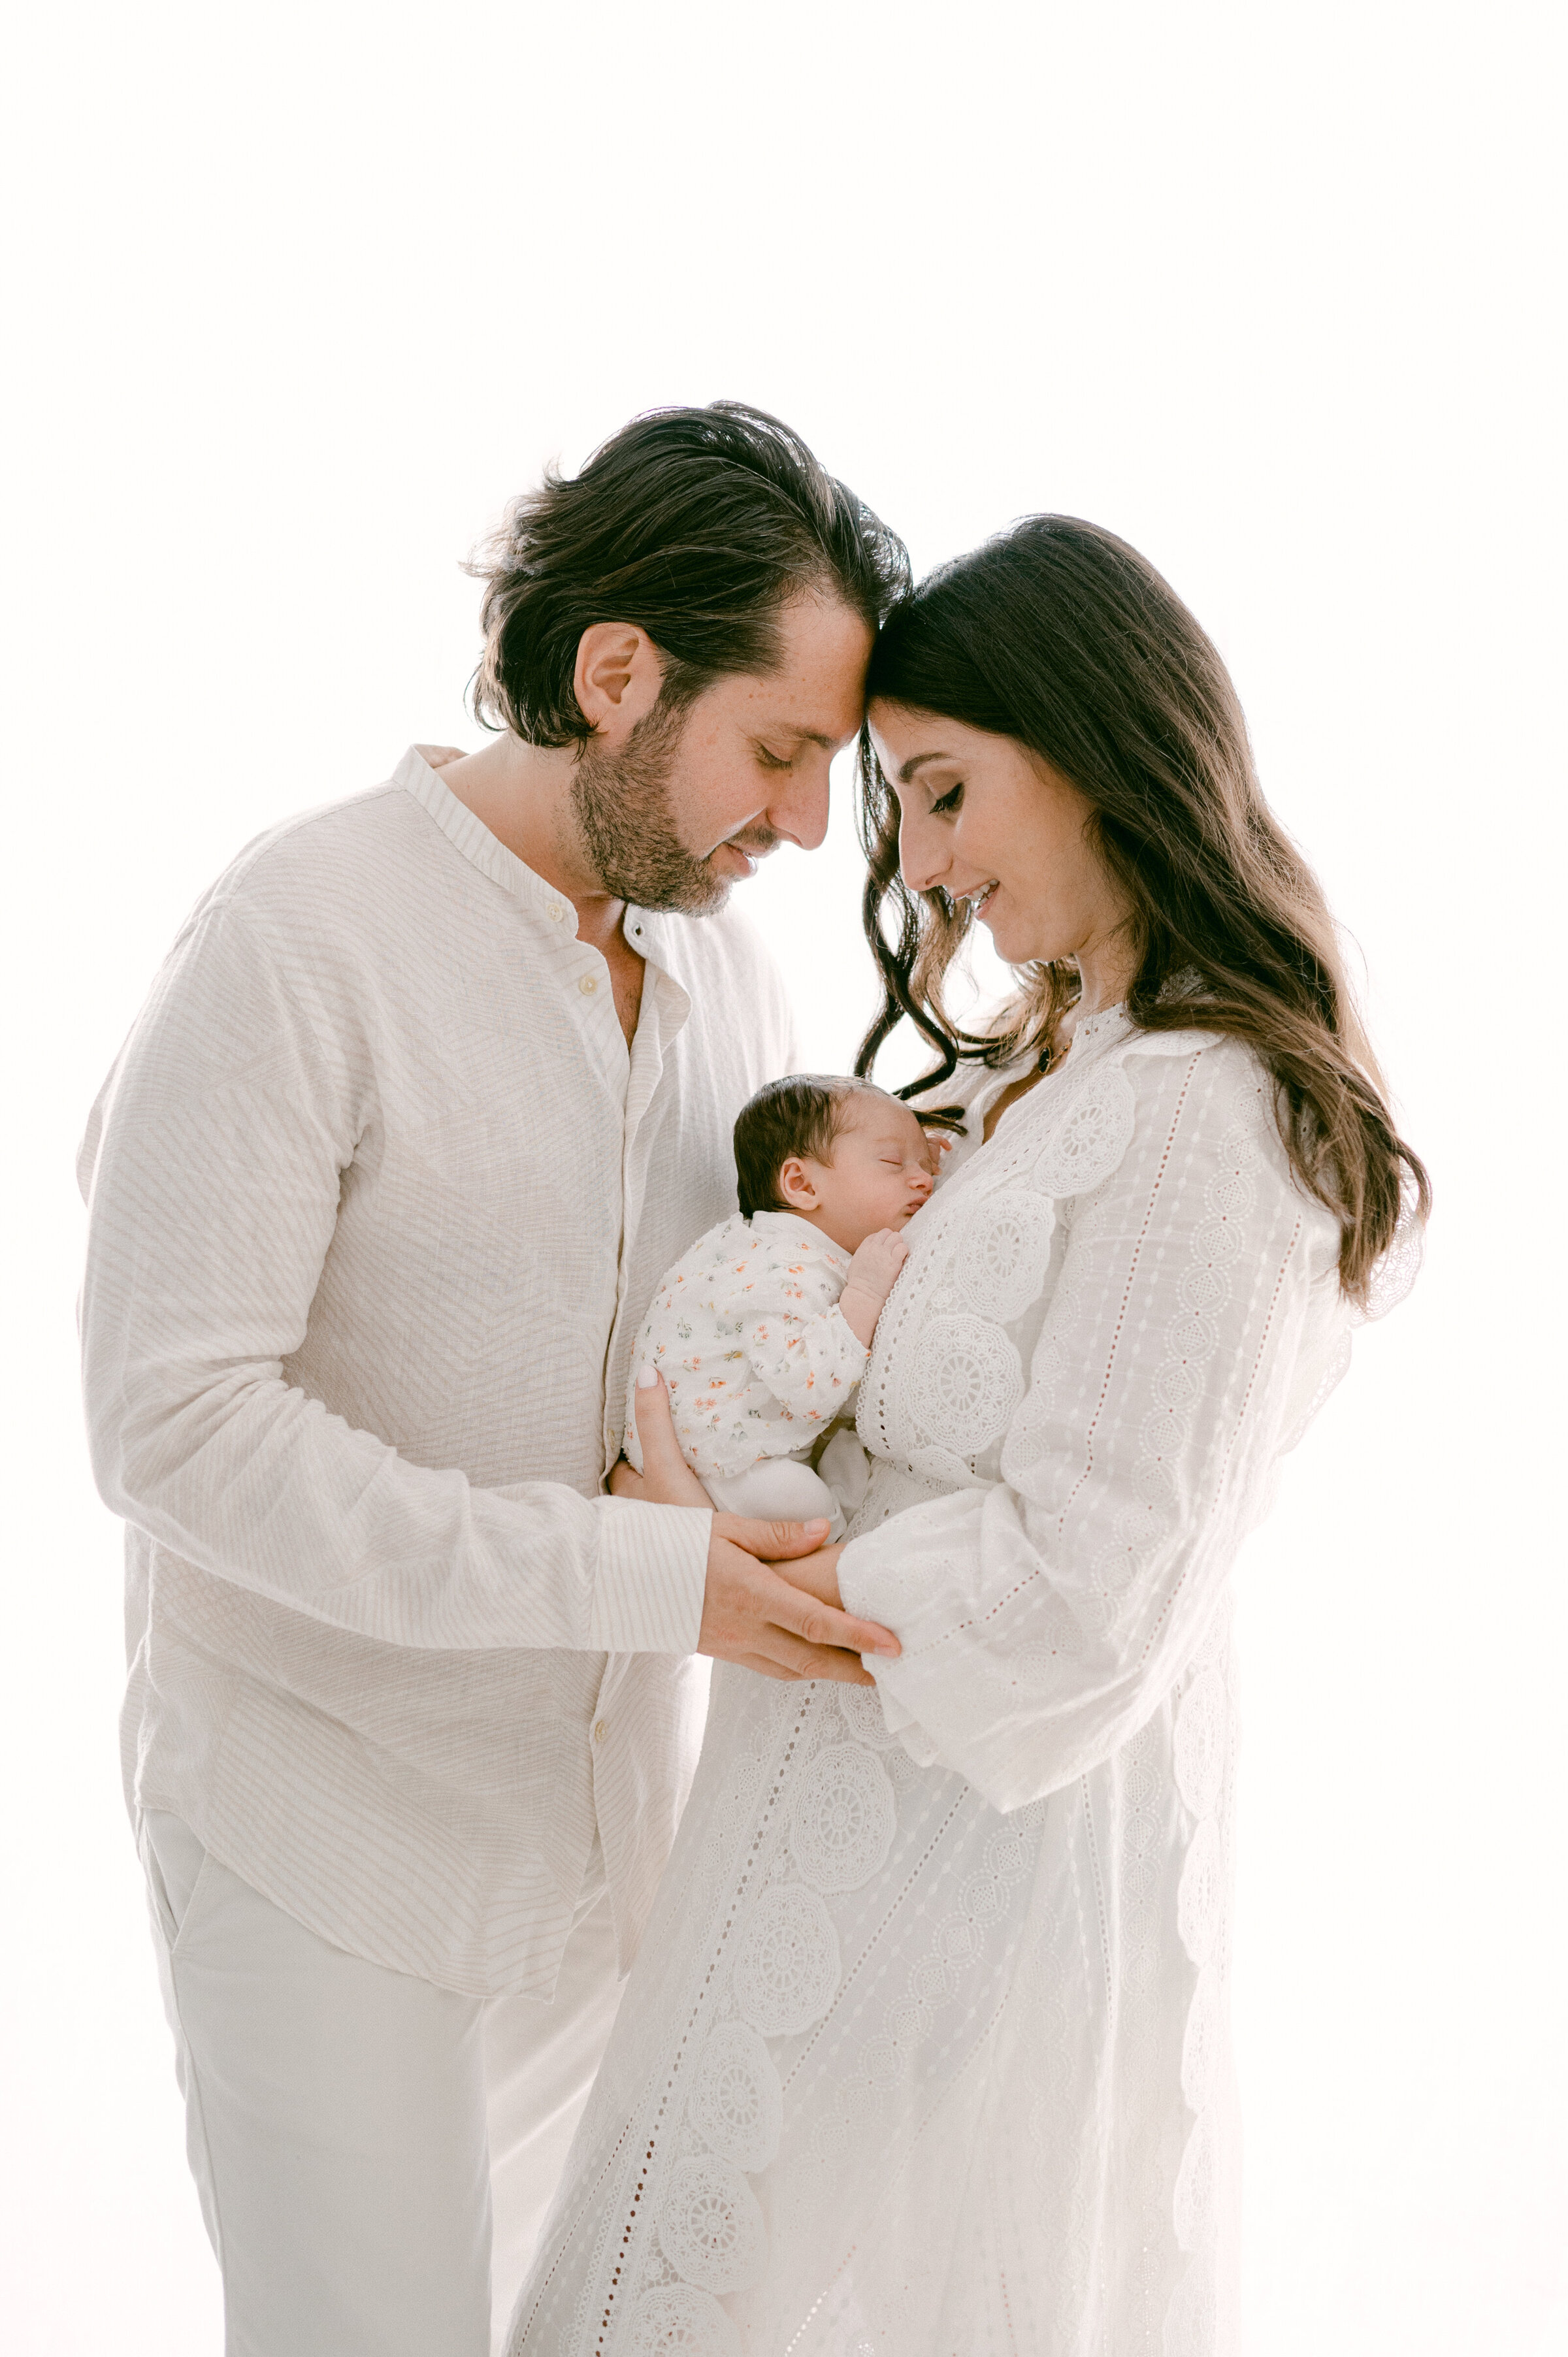 Dad and mom holding their newborn baby by Miami Newborn Photographer